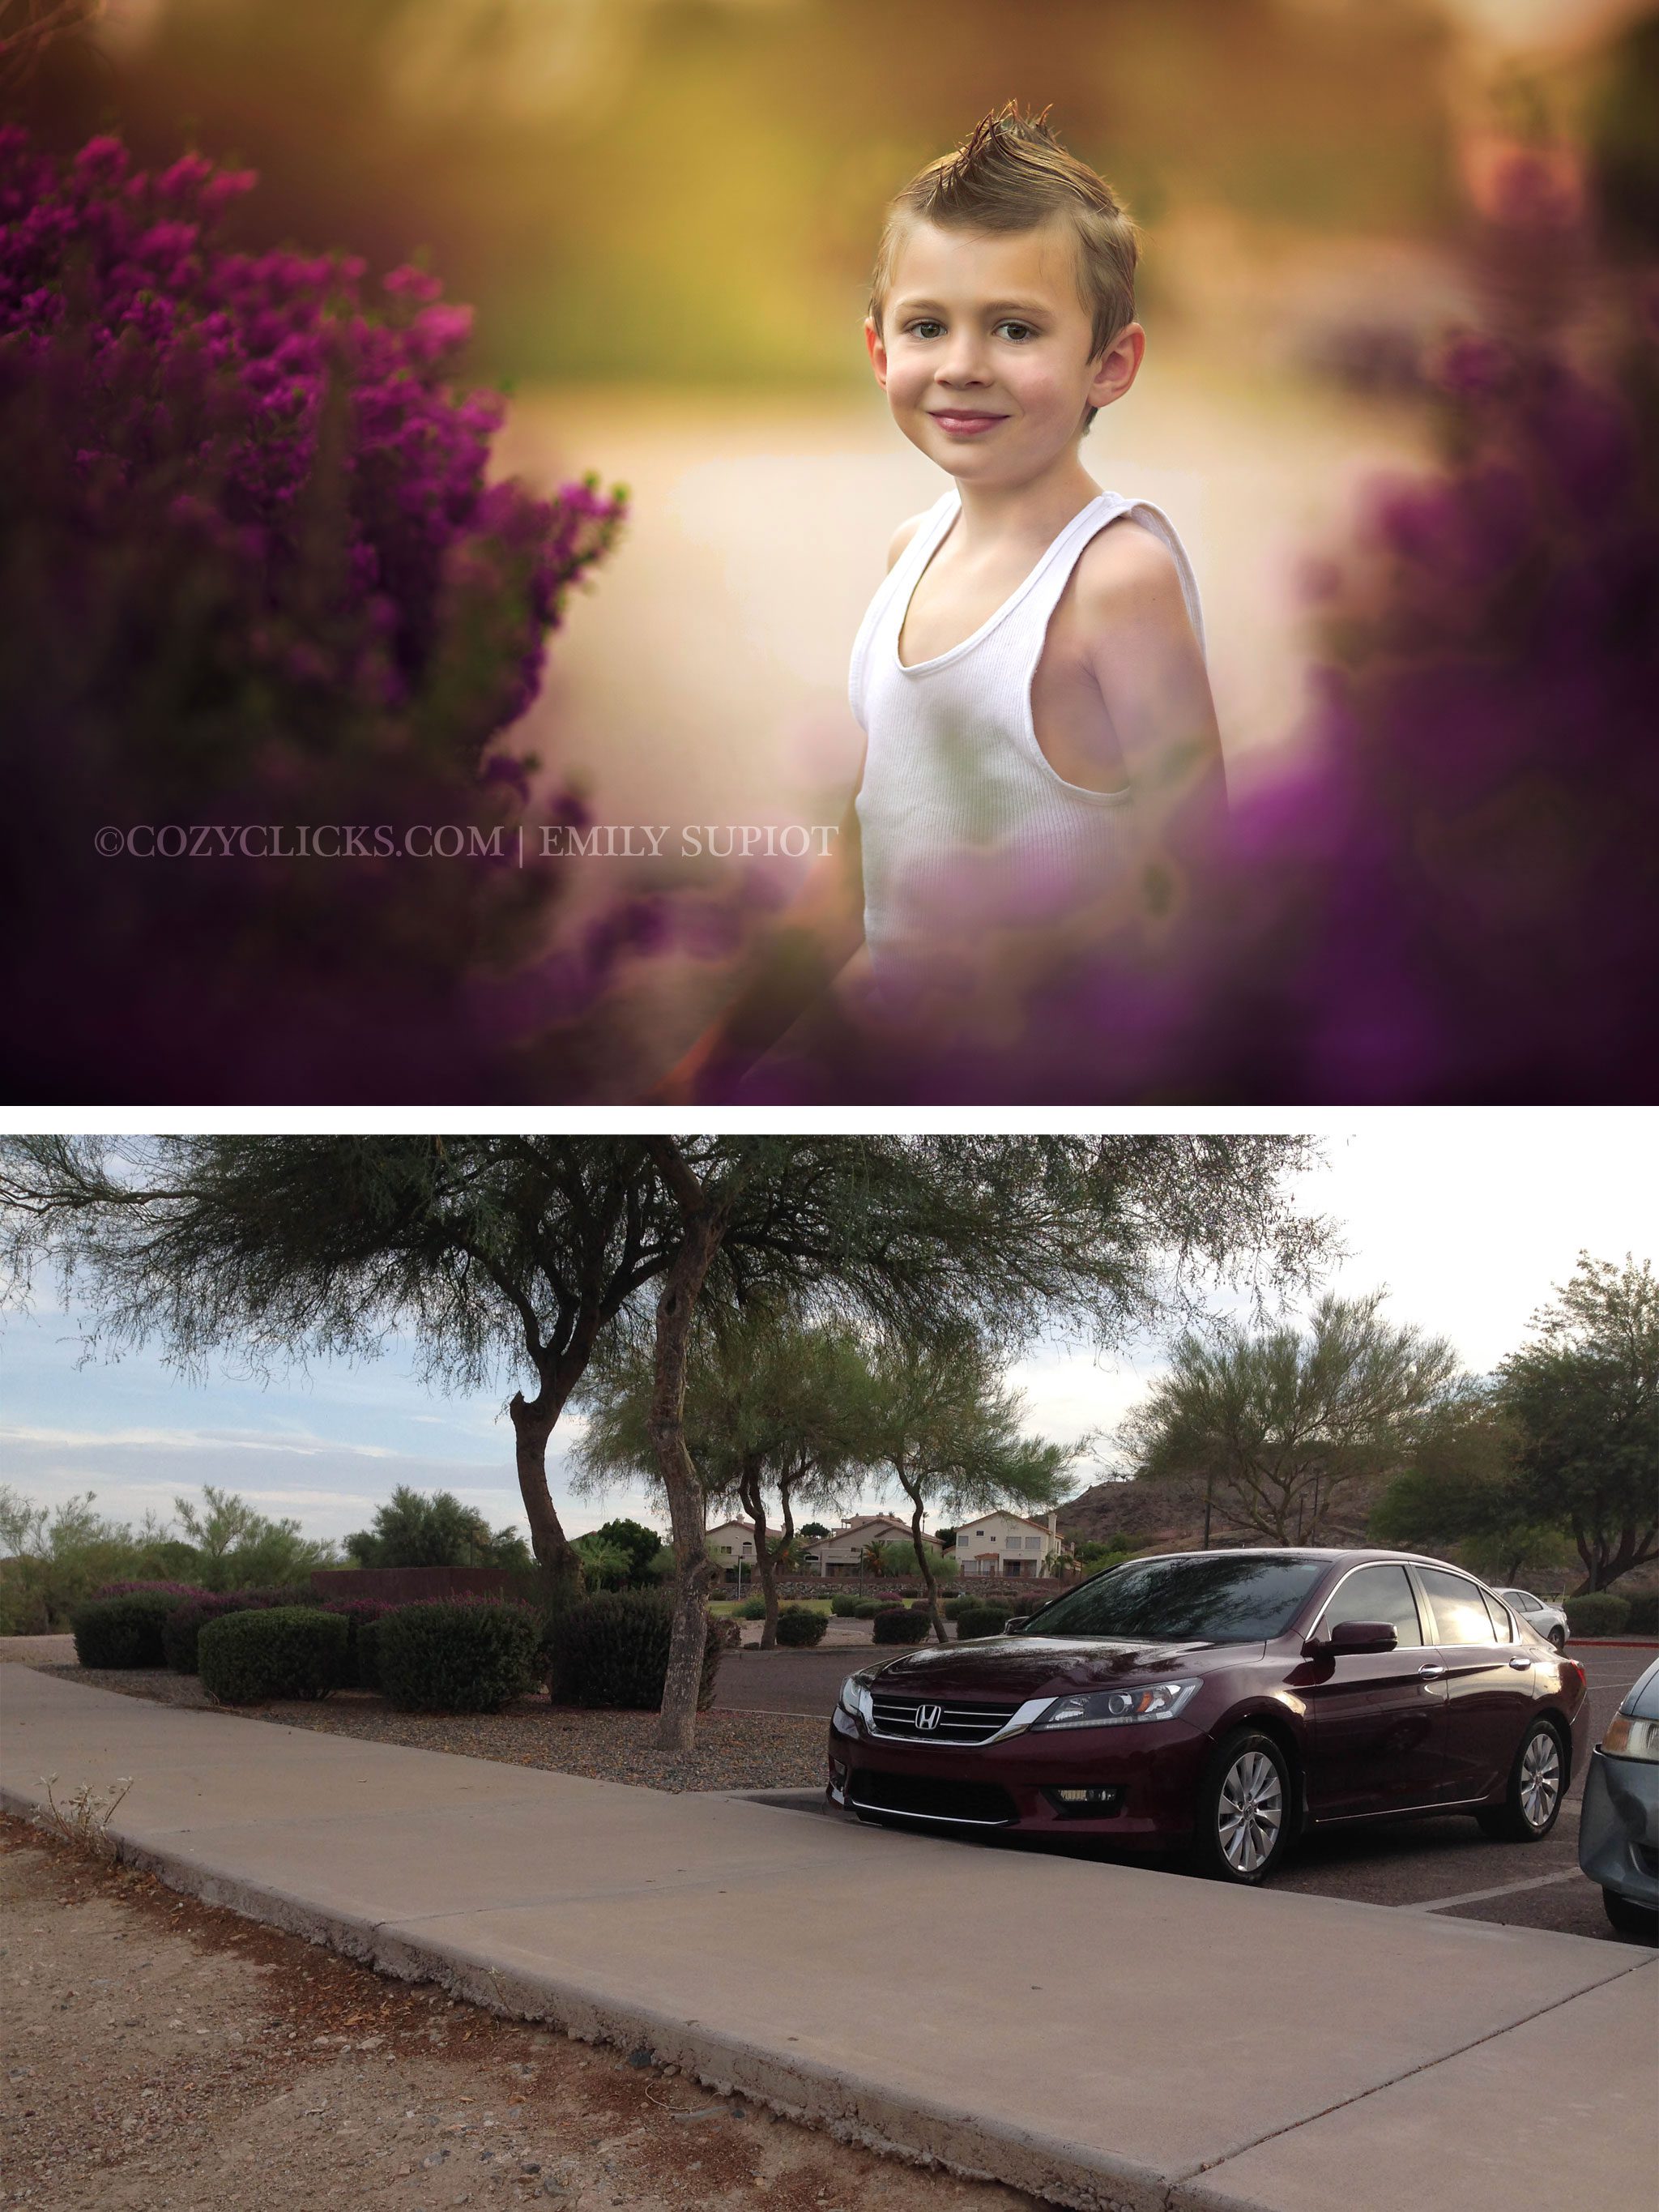 Child Photography in the Ahwatukee, Chandler and Phoenix areas.  Family photographer at Desert Foothills Park